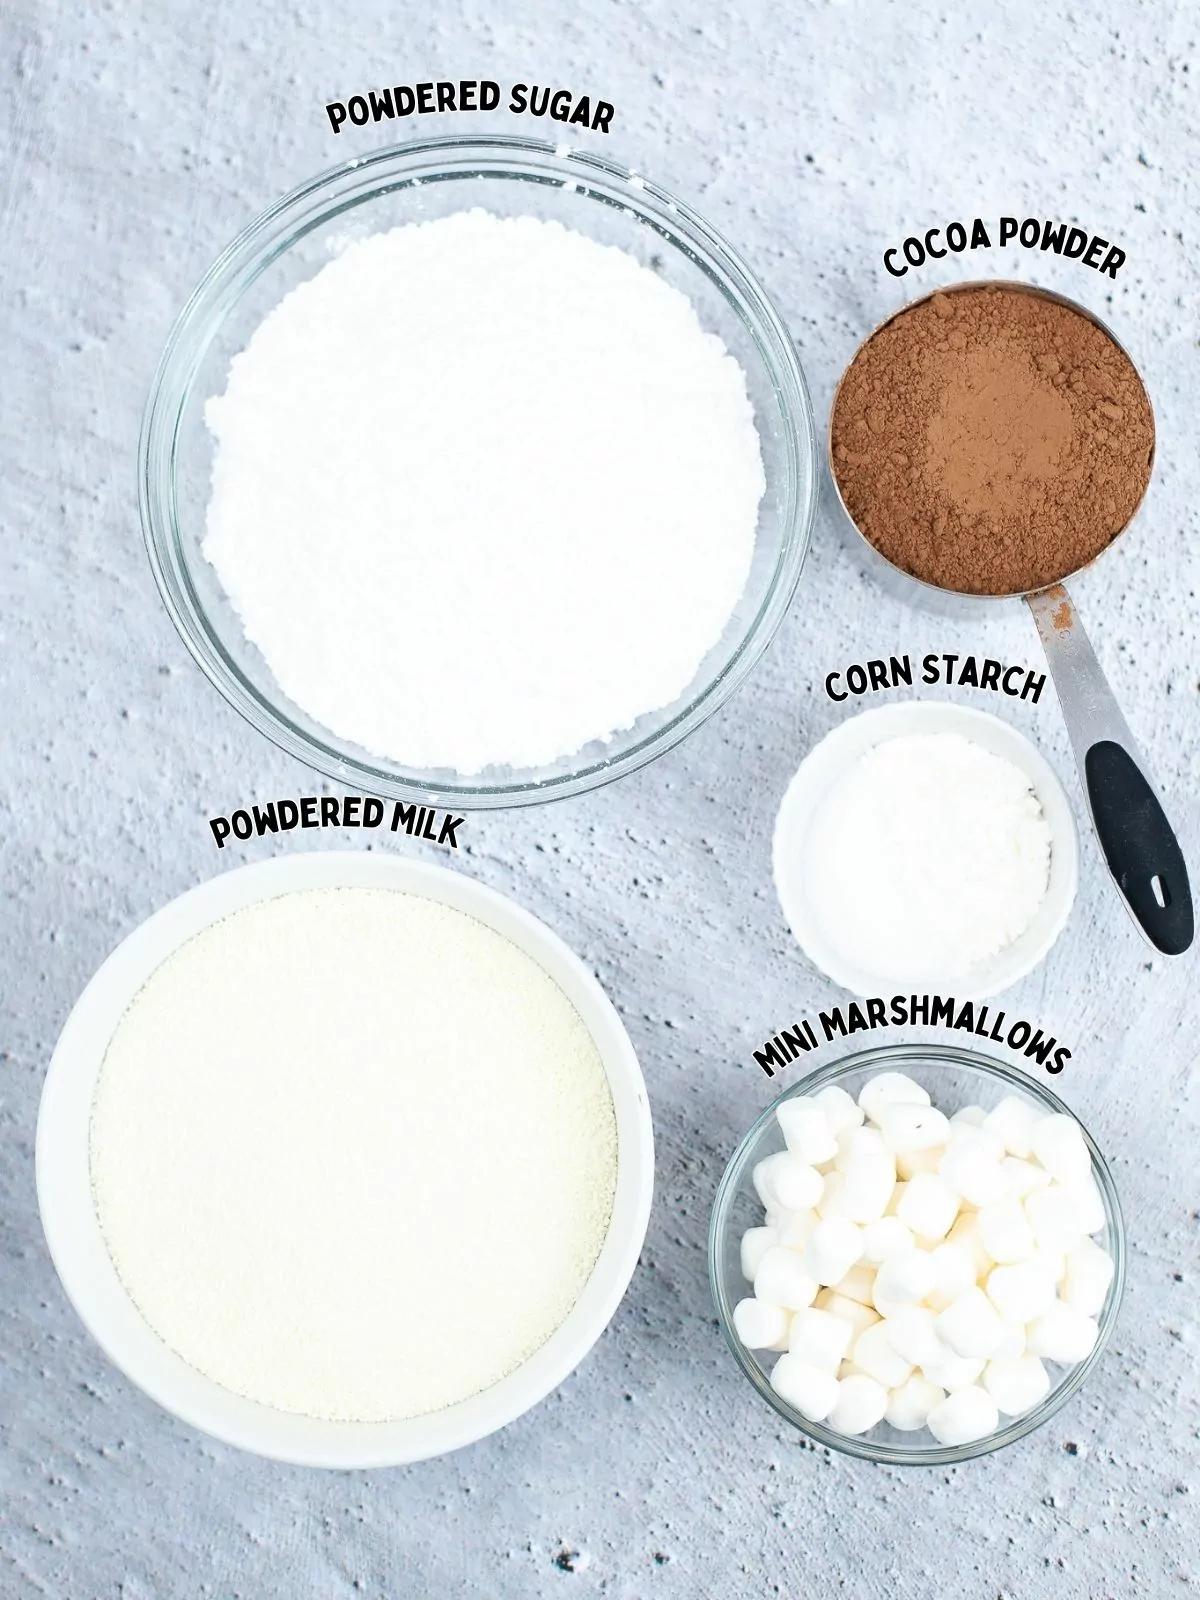 ingredients for homemade hot chocolate in small bowls.